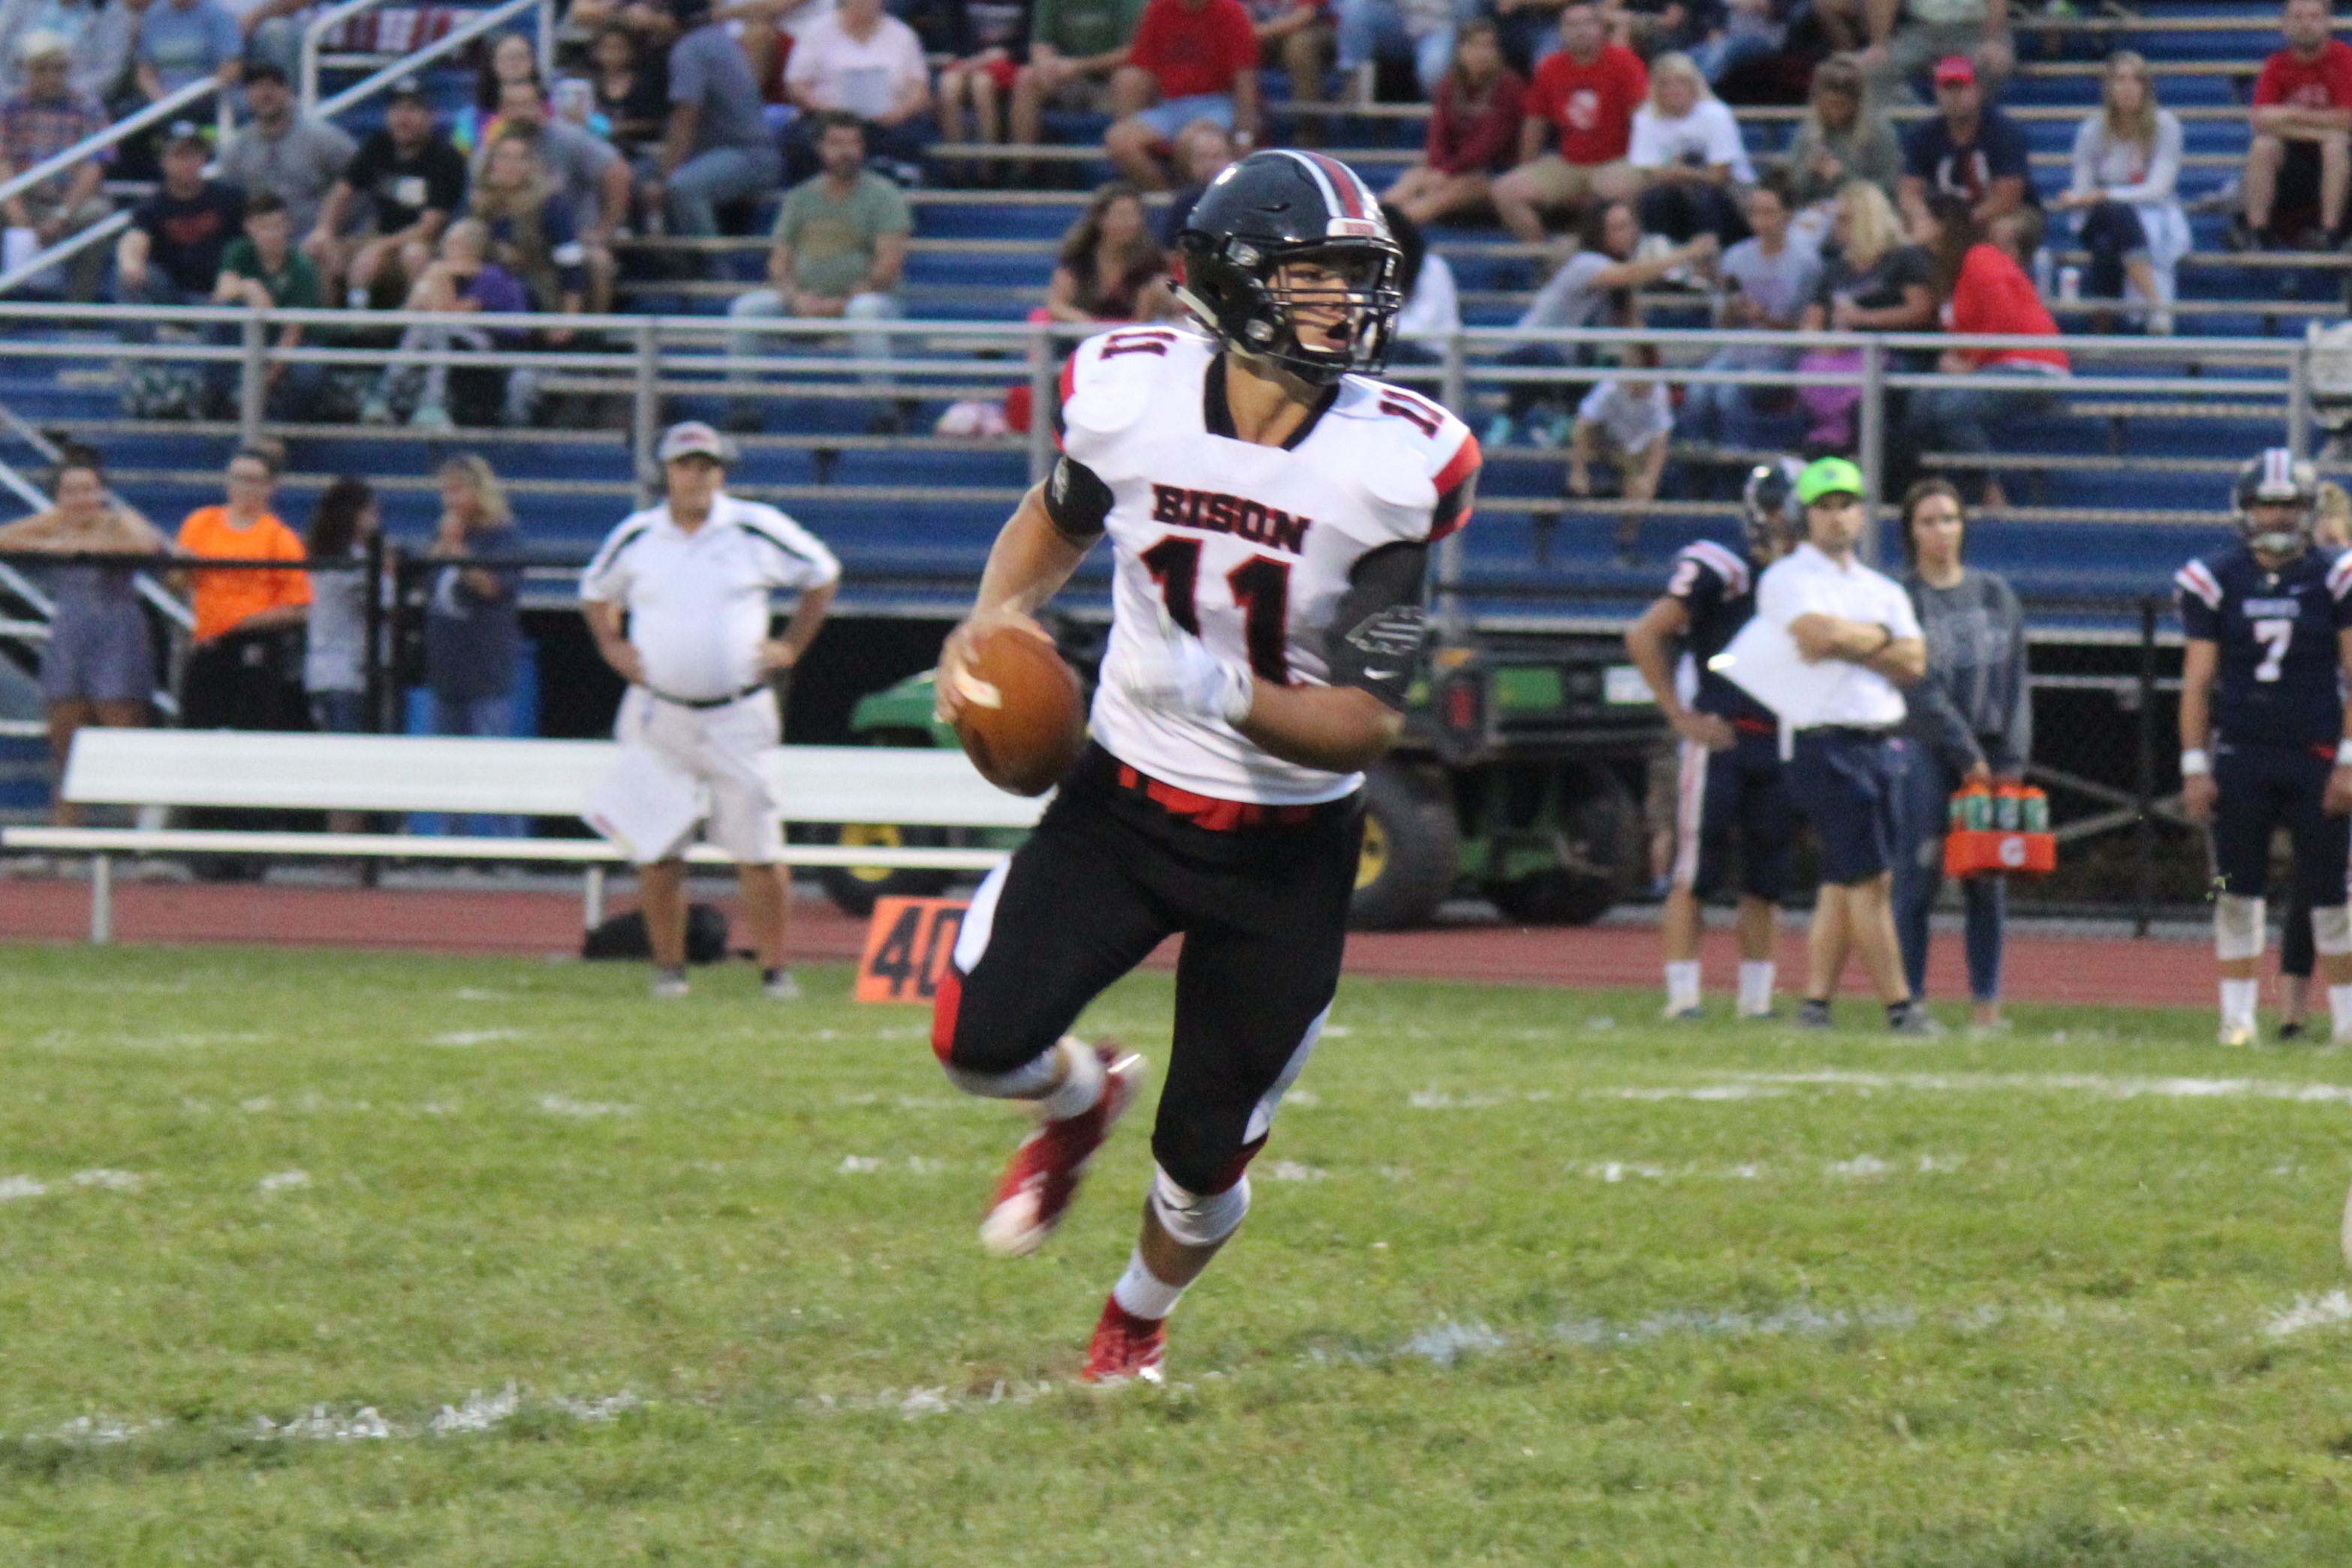 Isaac Rumery accounted for five touchdowns against Huntingdon, three passing and two rushing.